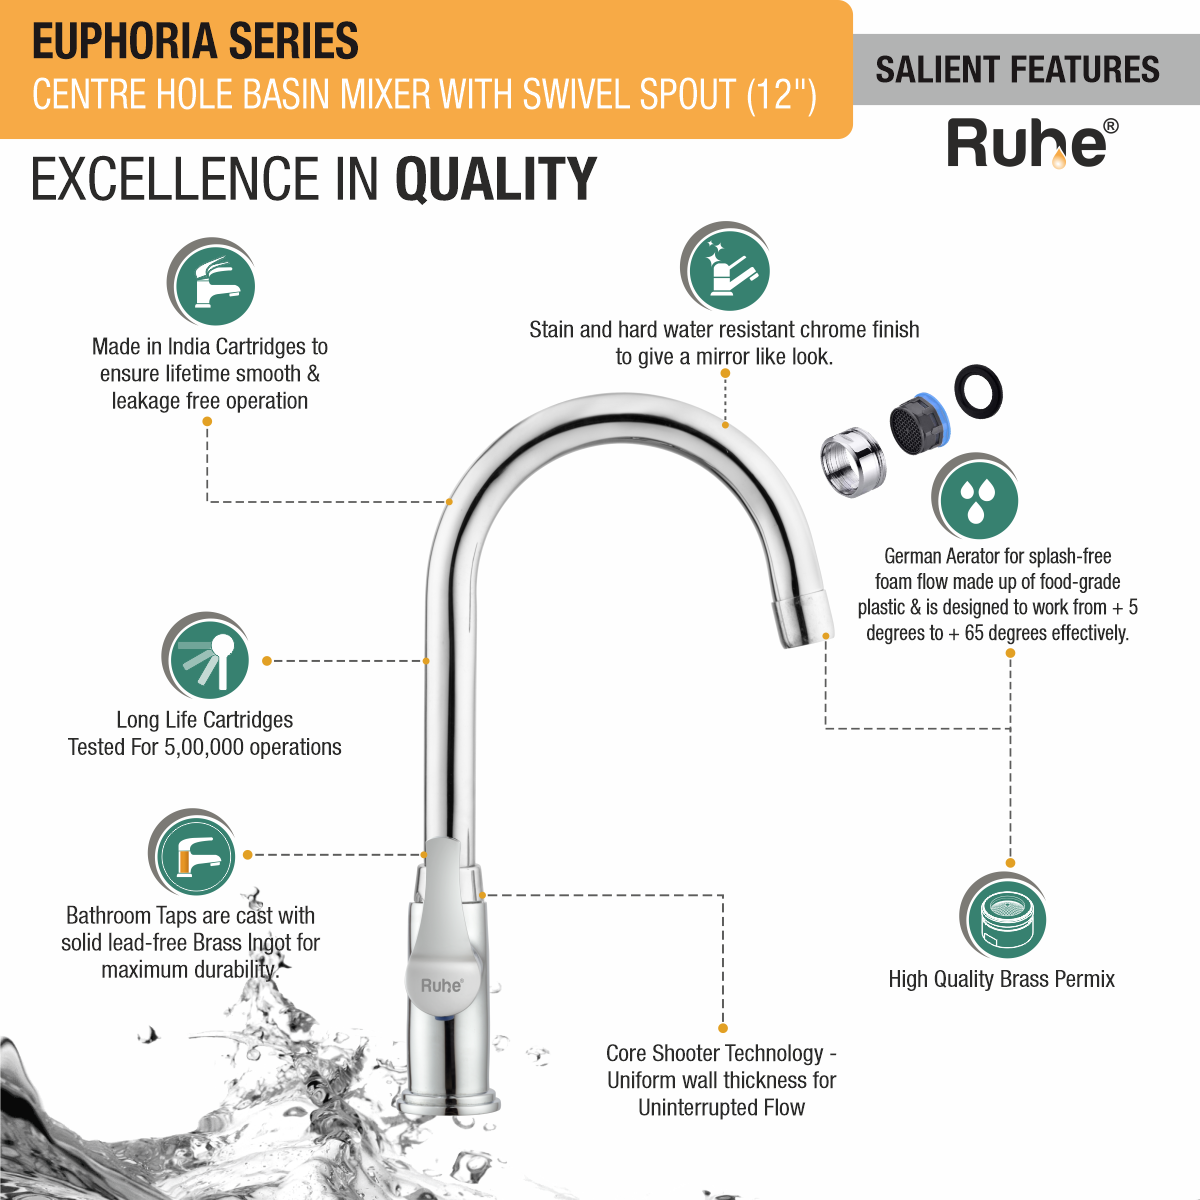 Euphoria Centre Hole Basin Mixer with Small (12 inches) Round Swivel Spout Faucet features